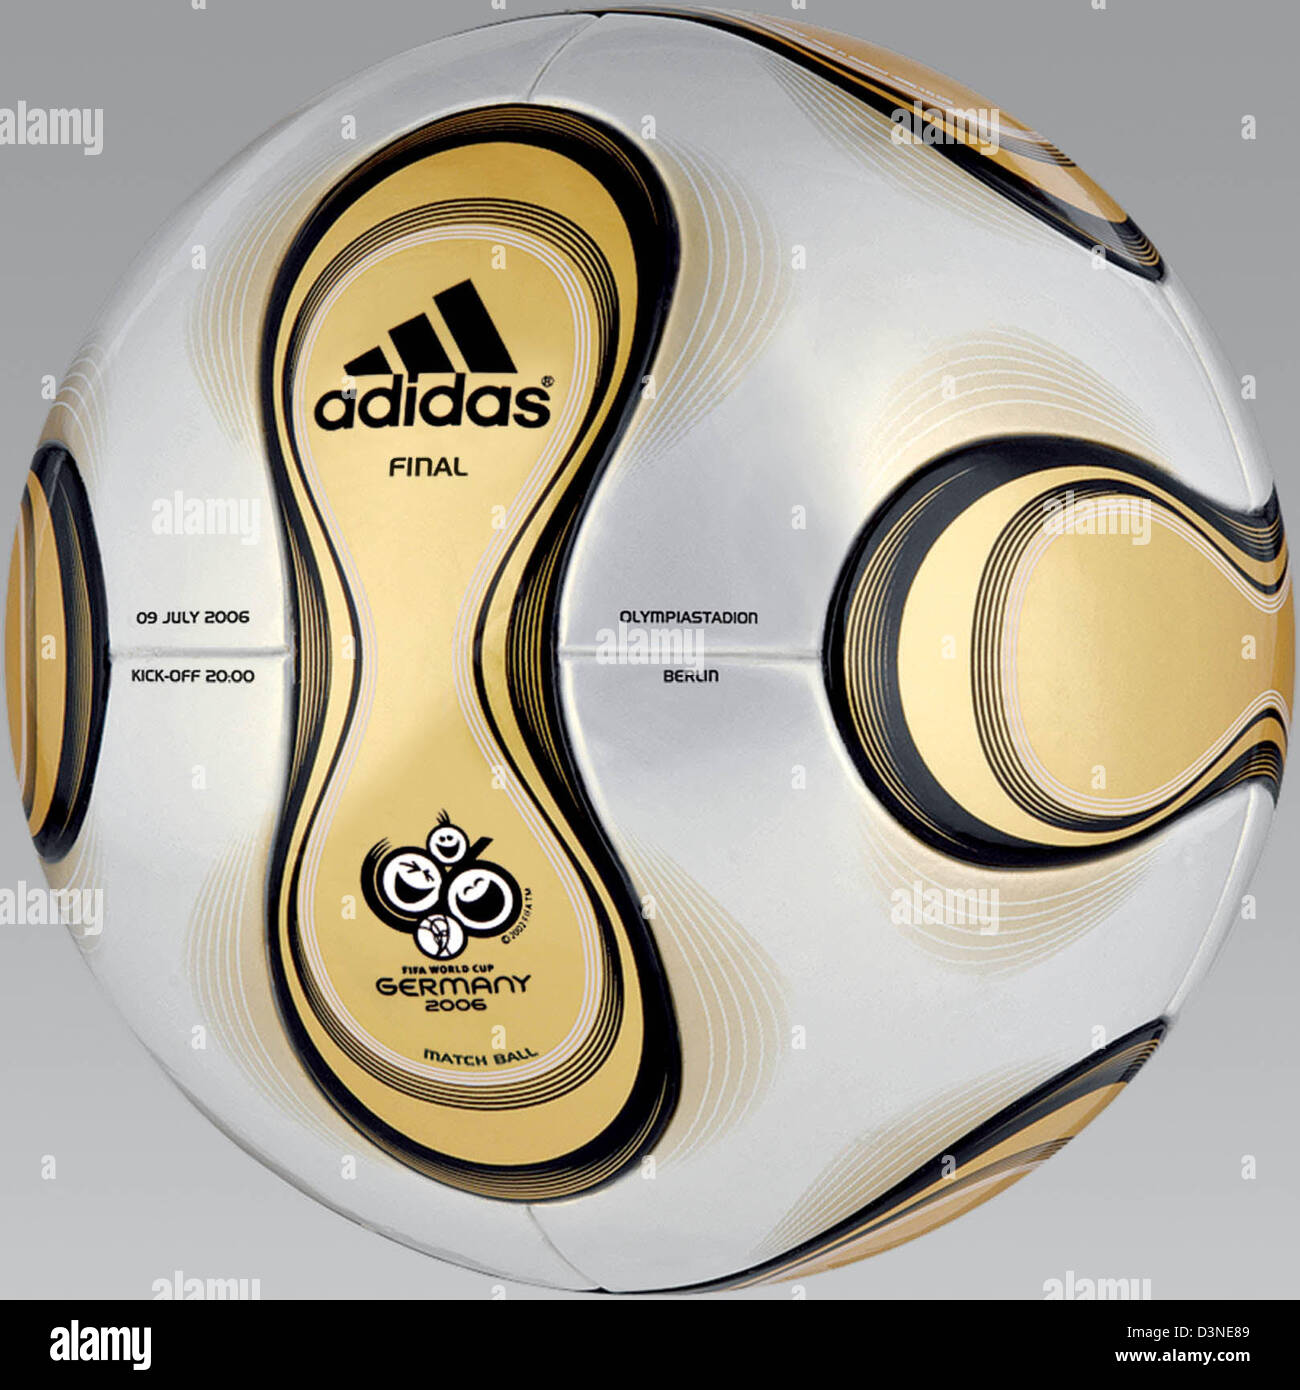 The picture shows the golden football developed especially for the finale  of the upcoming World Cup, Berlin, Germany, Tuesday 18 April 2006. The ball  bears the name 'Teamgeist Berlin' (Team spirit Berlin).